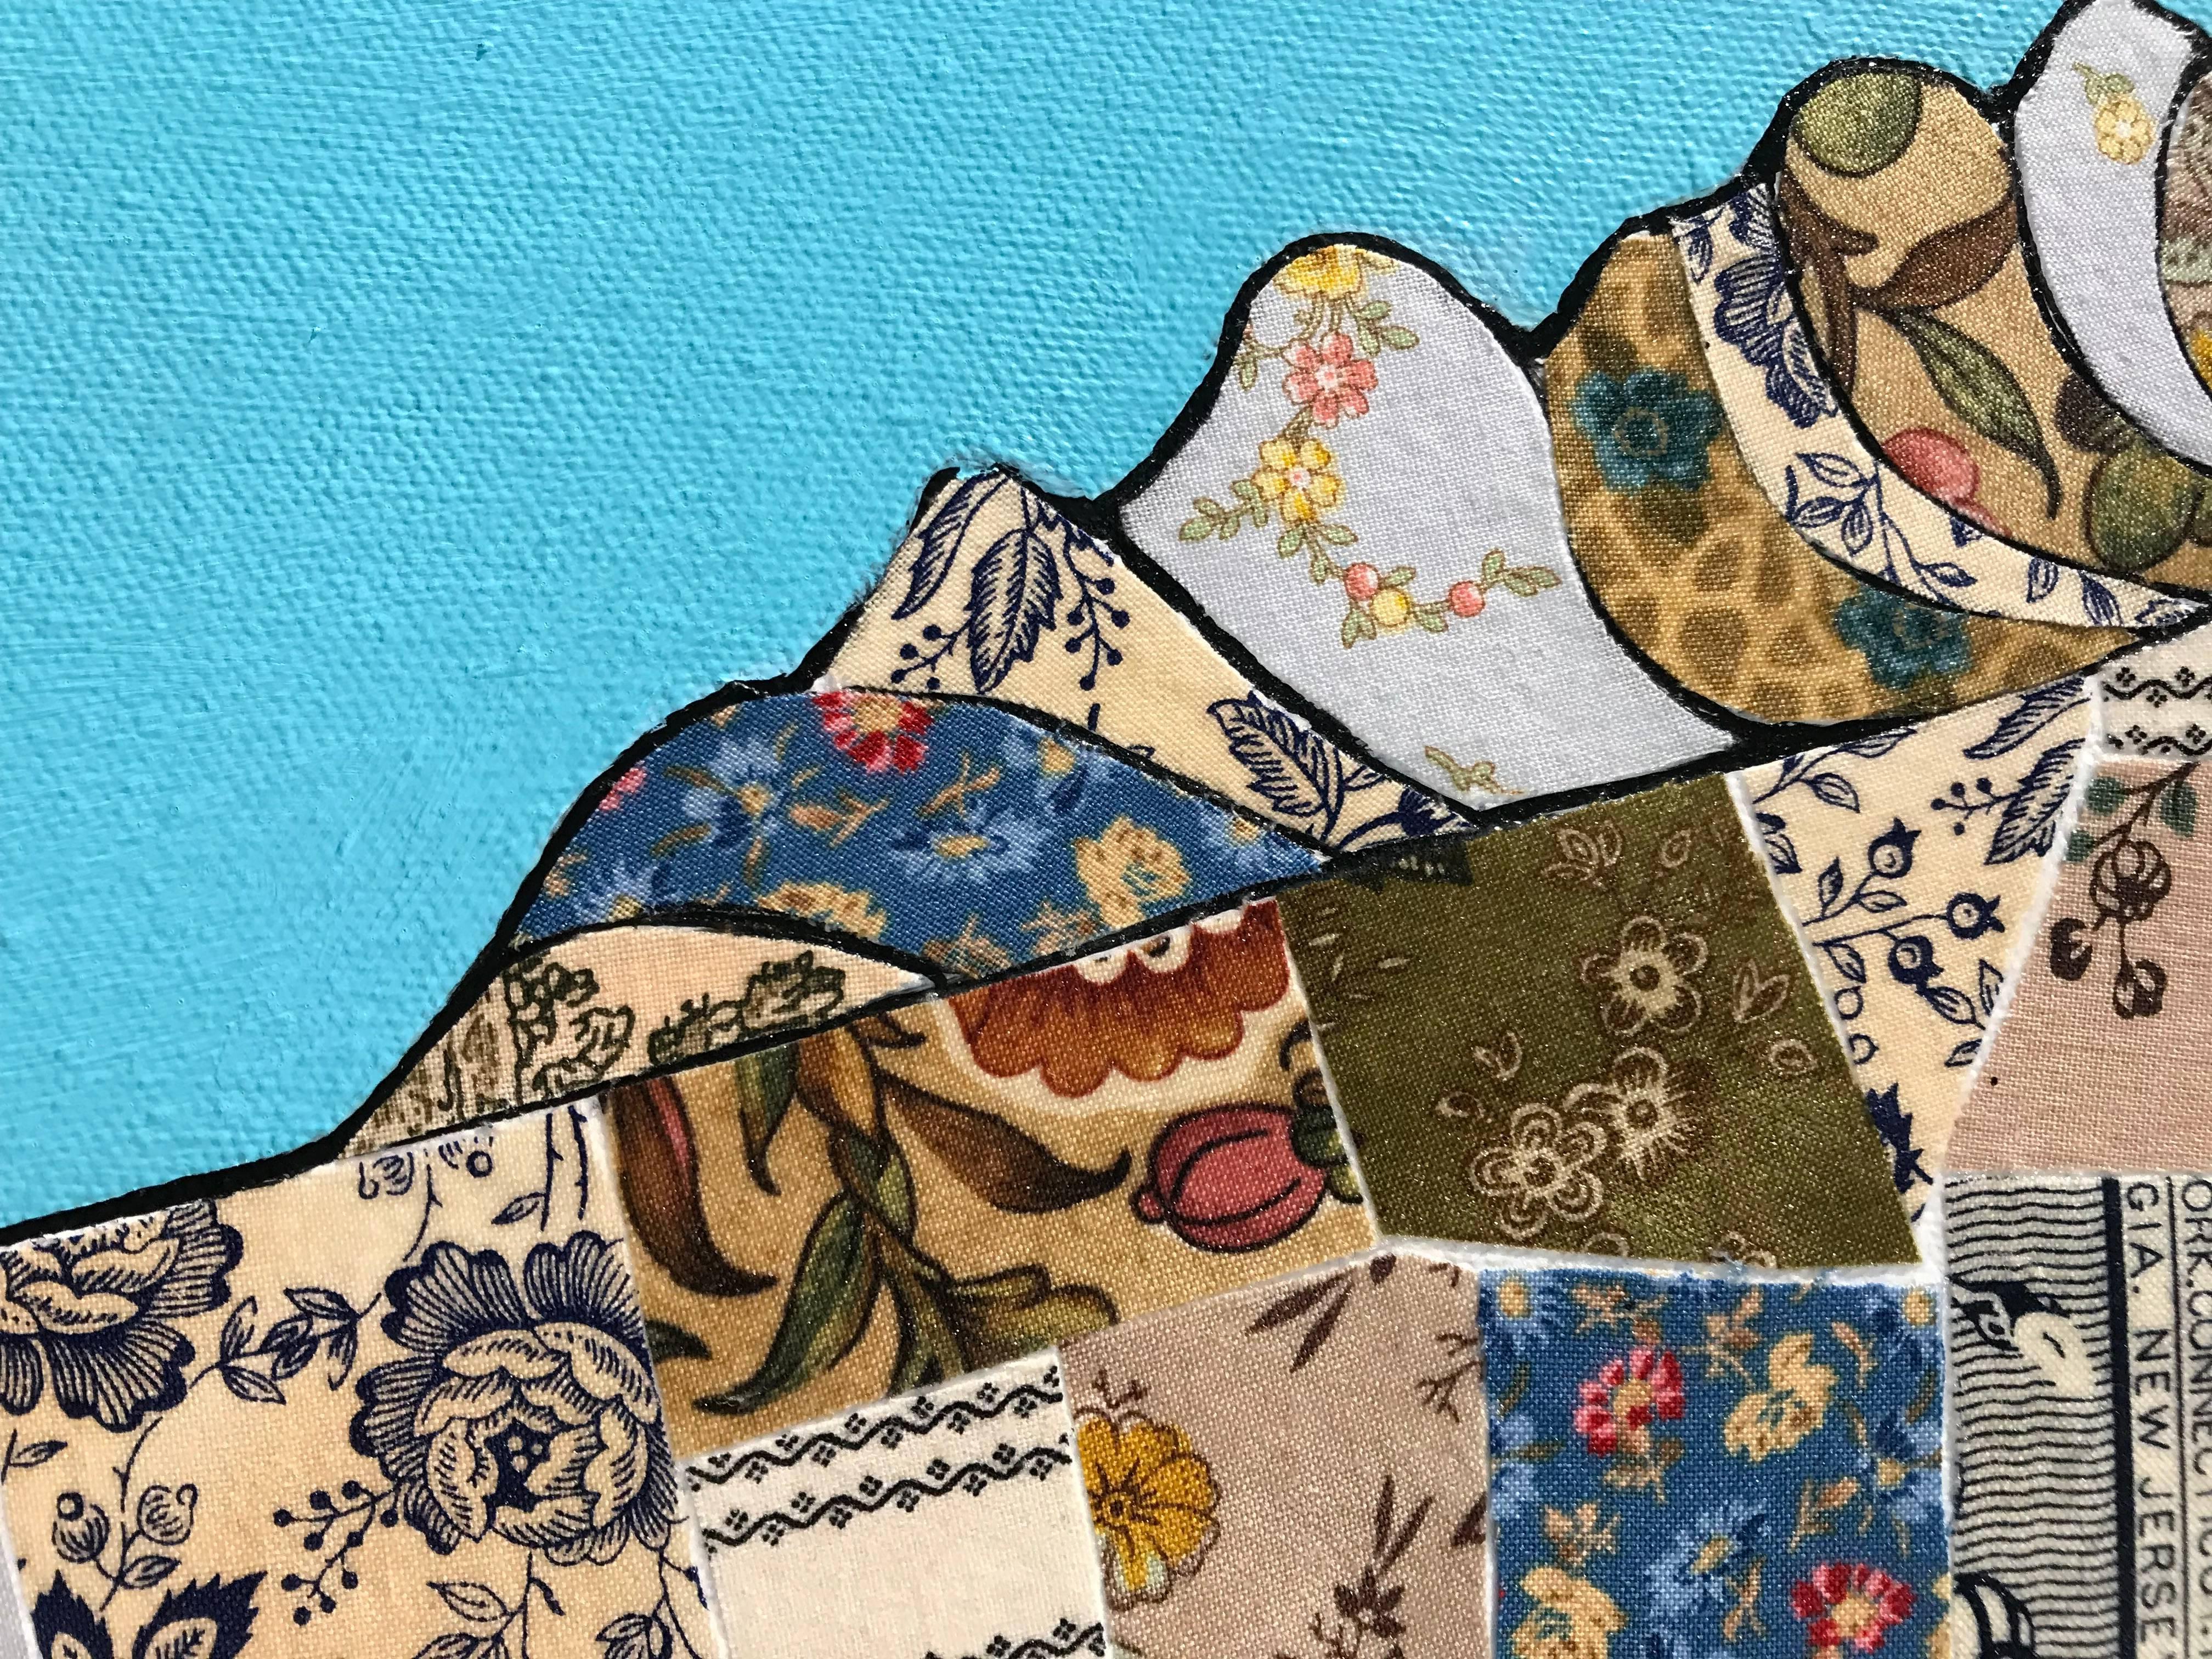 Evoking Eleanor is a contemporary mixed media piece by artist Lisa A. Foster. In this piece, Lisa contrasts a flat blue background with figures composed of civil war era reproduction fabrics collaged to complicate the two figures depicted. These